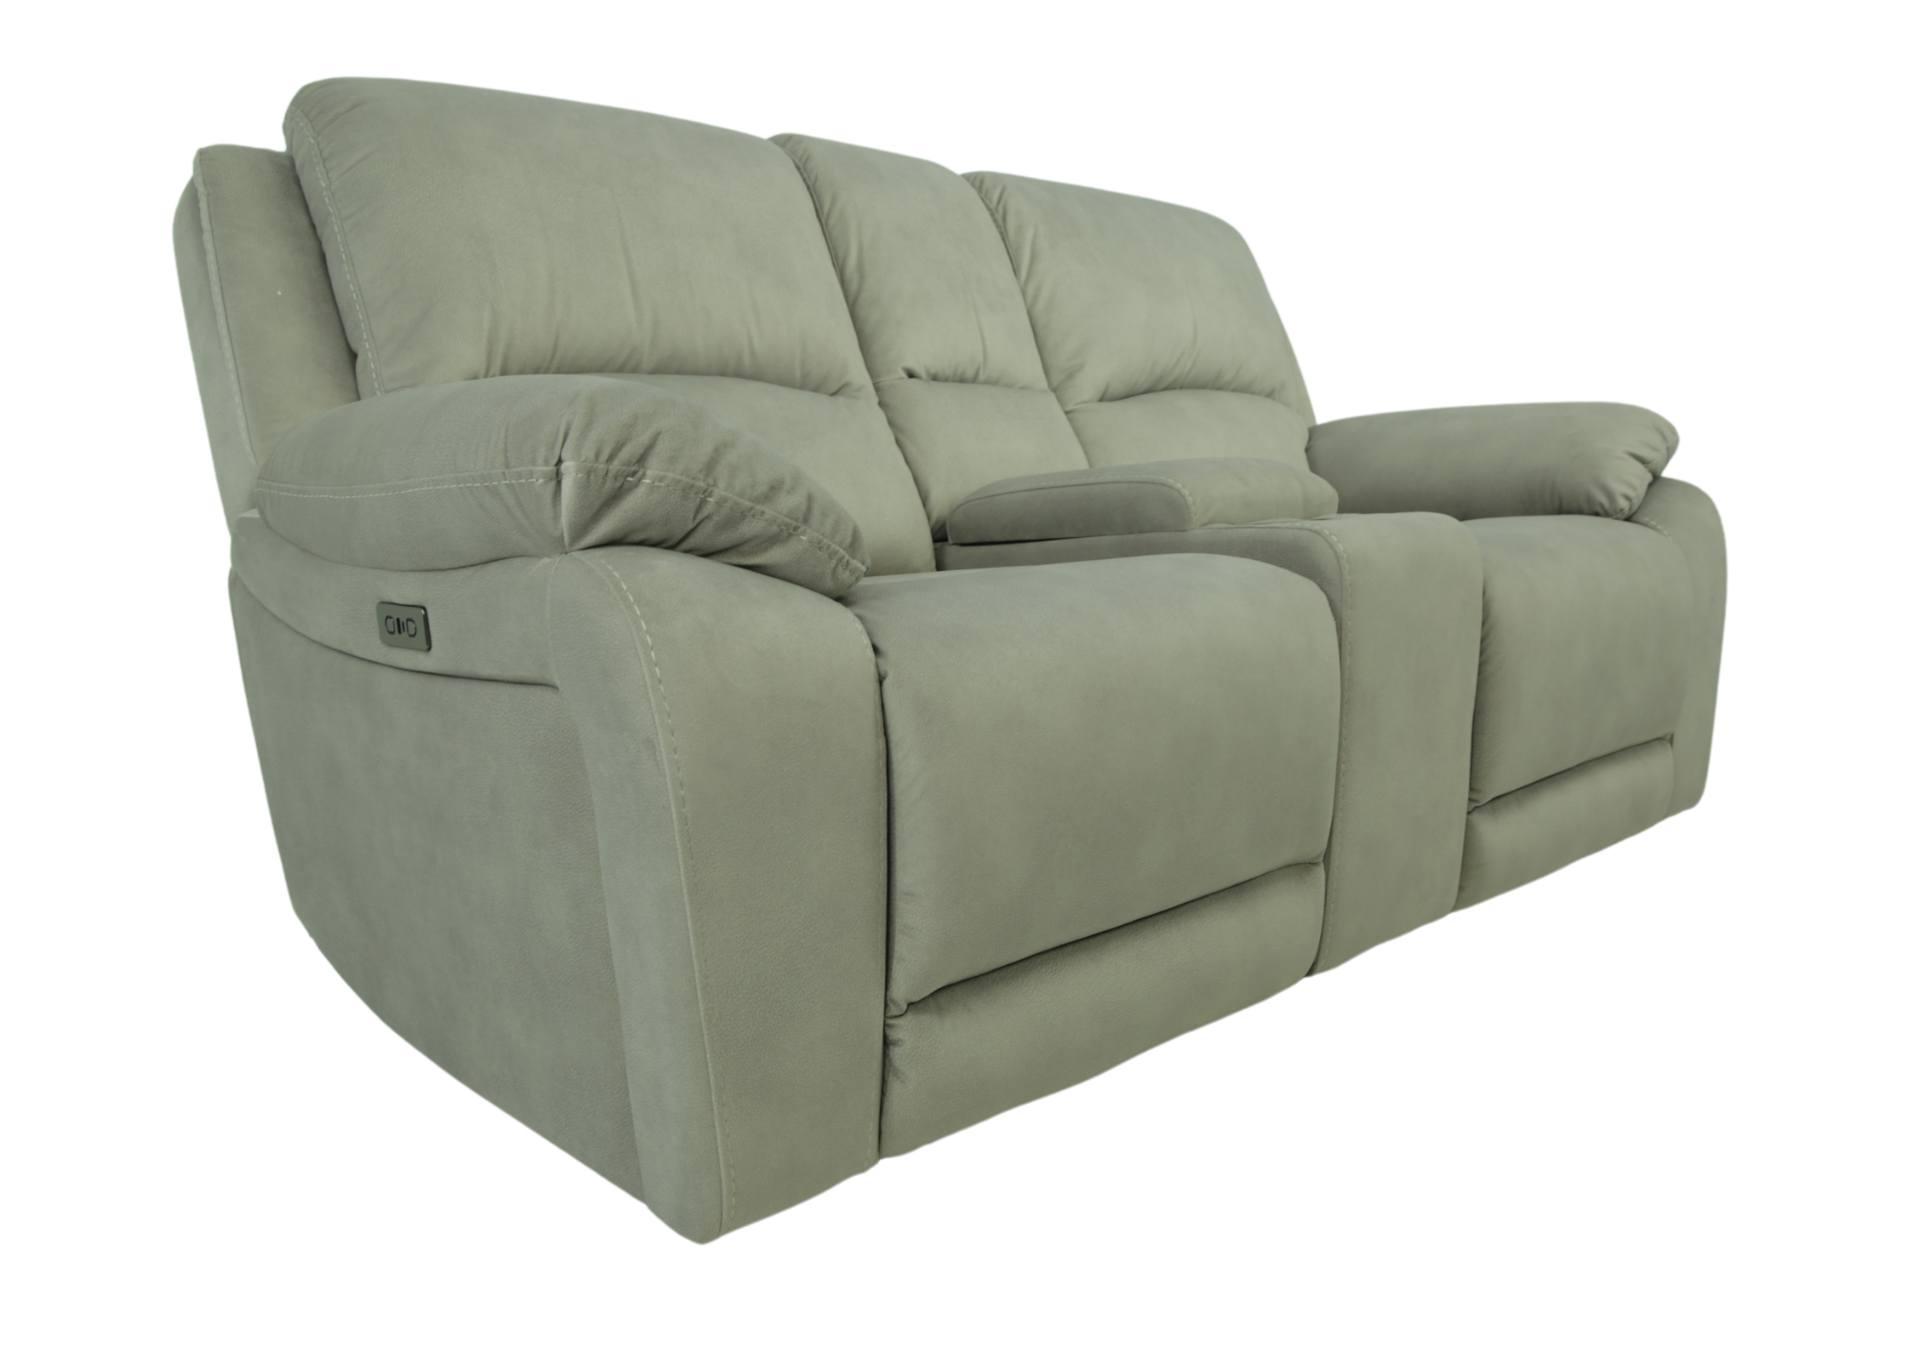 ASPEN LATTE 1P POWER LOVESEAT WITH CONSOLE,CHEERS